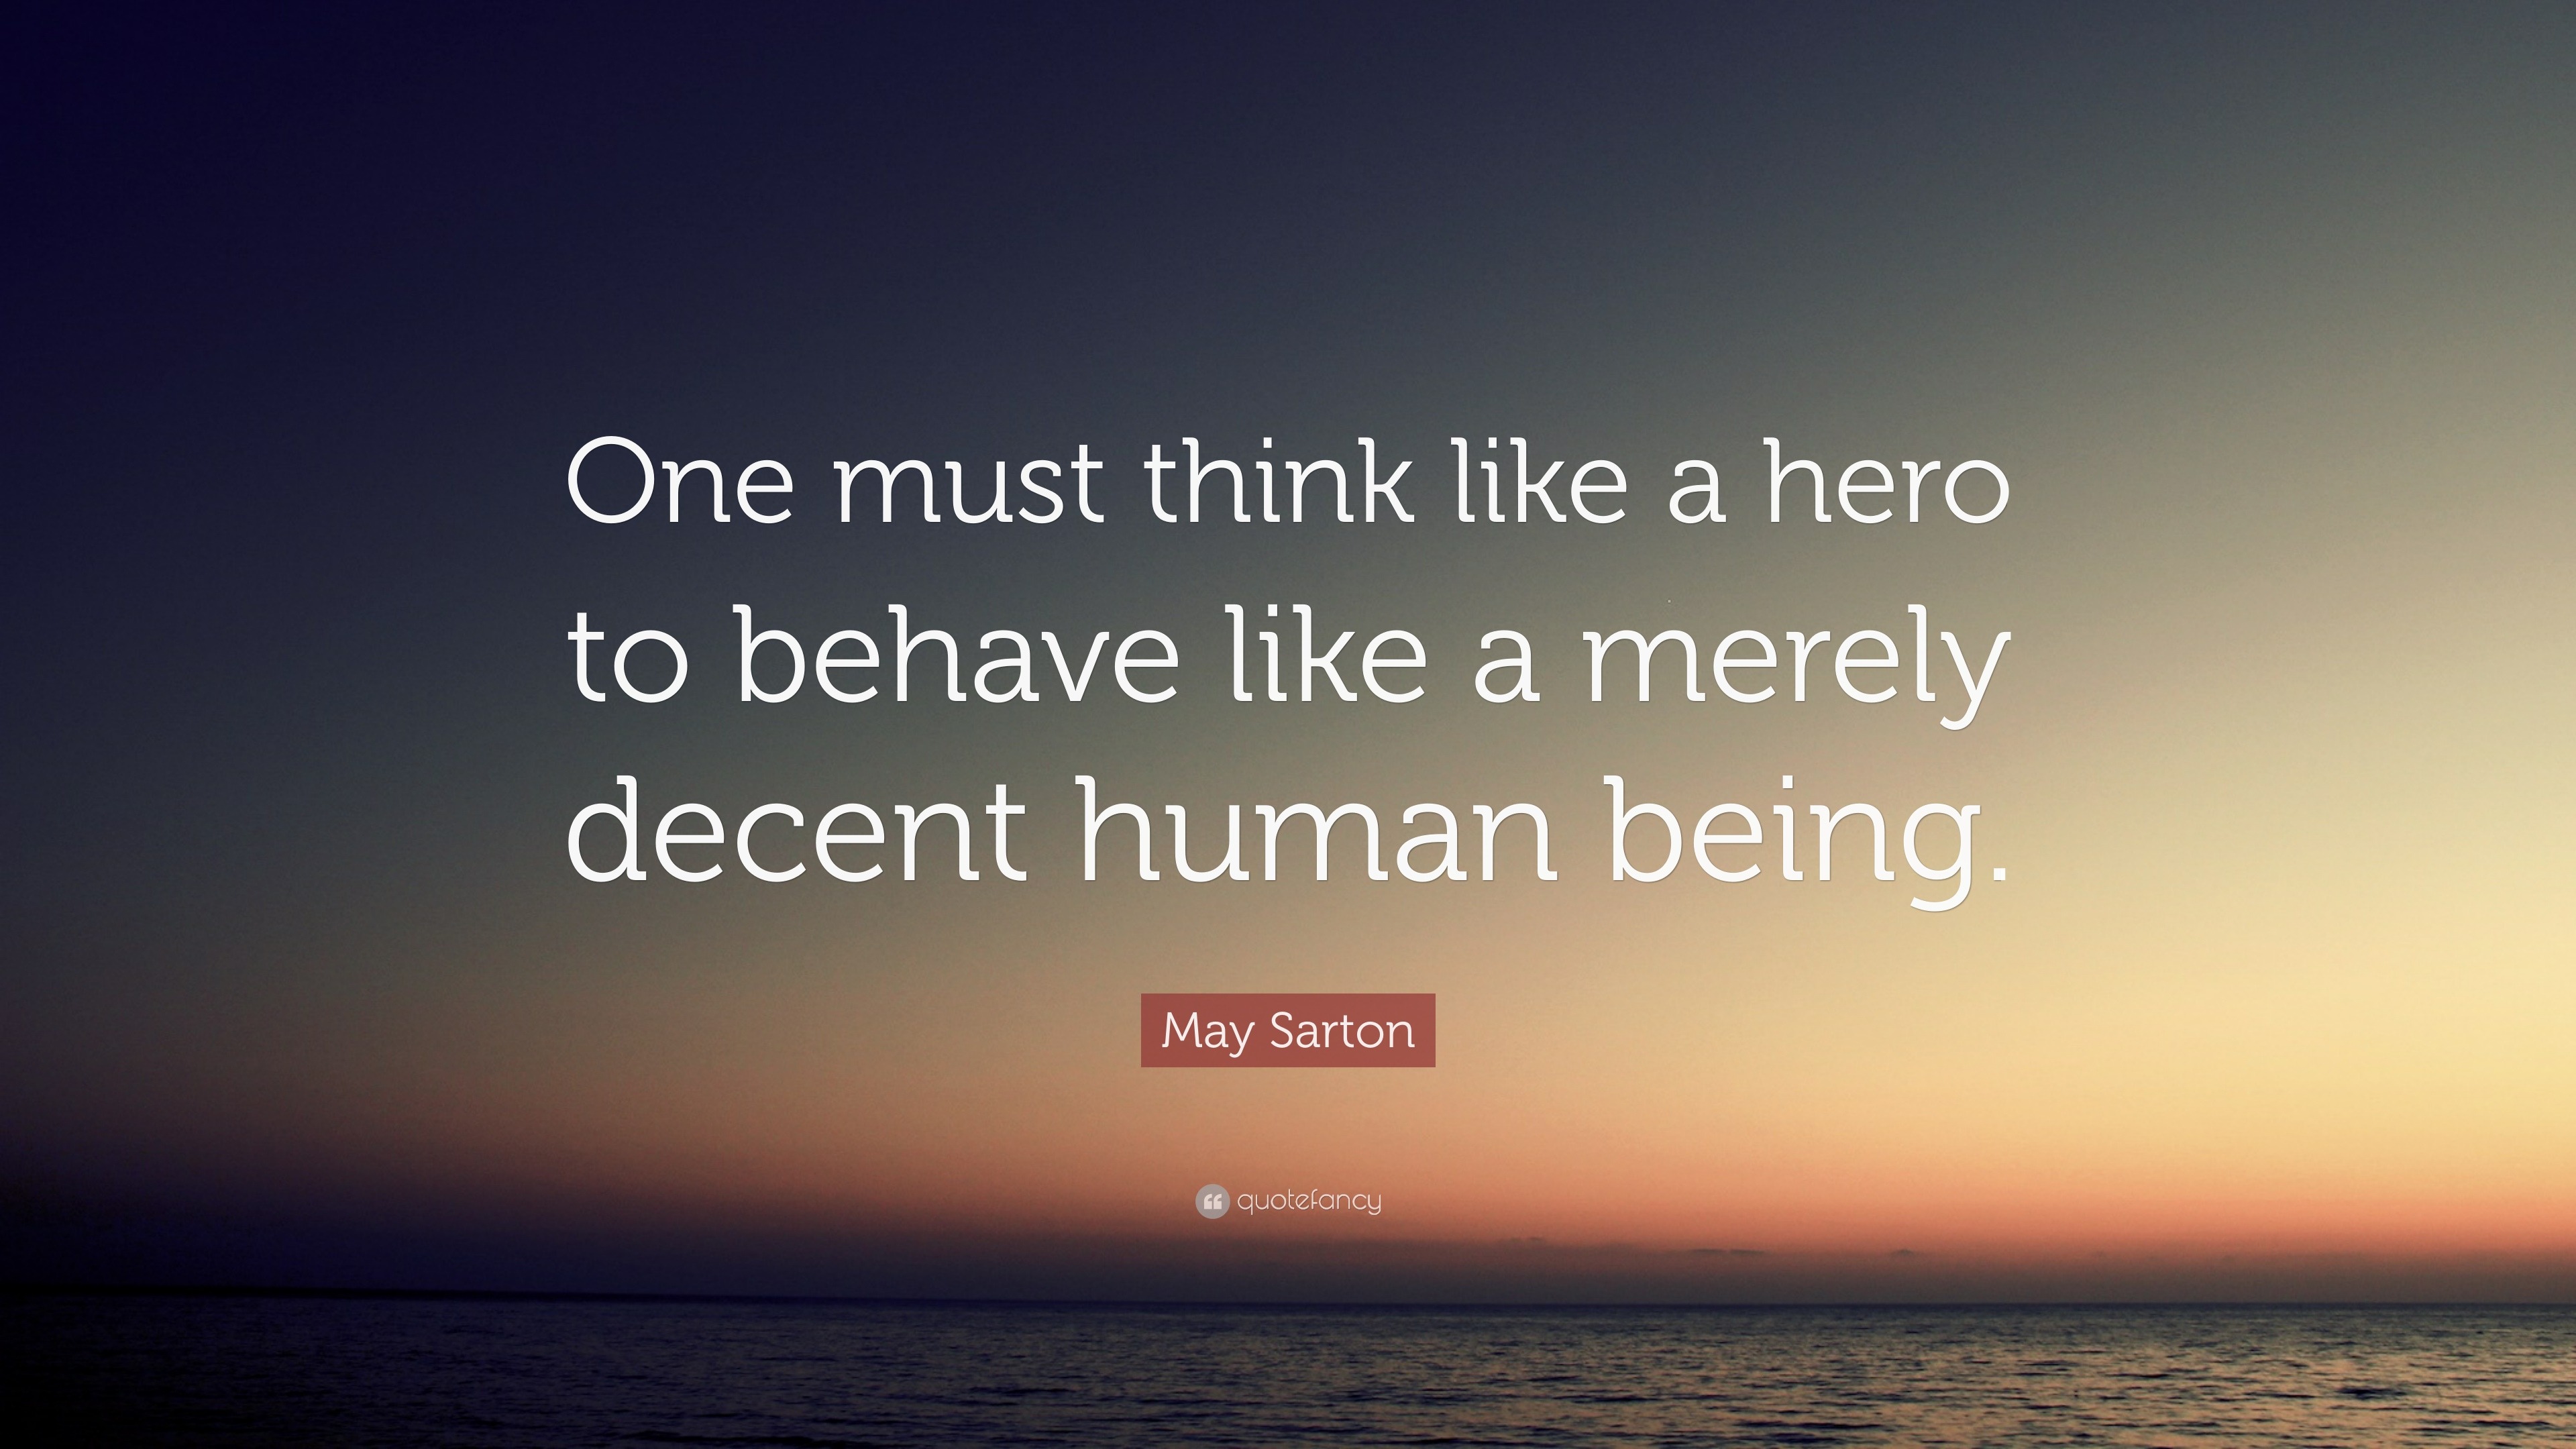 May Sarton Quote: “One must think like a hero to behave like a merely ...